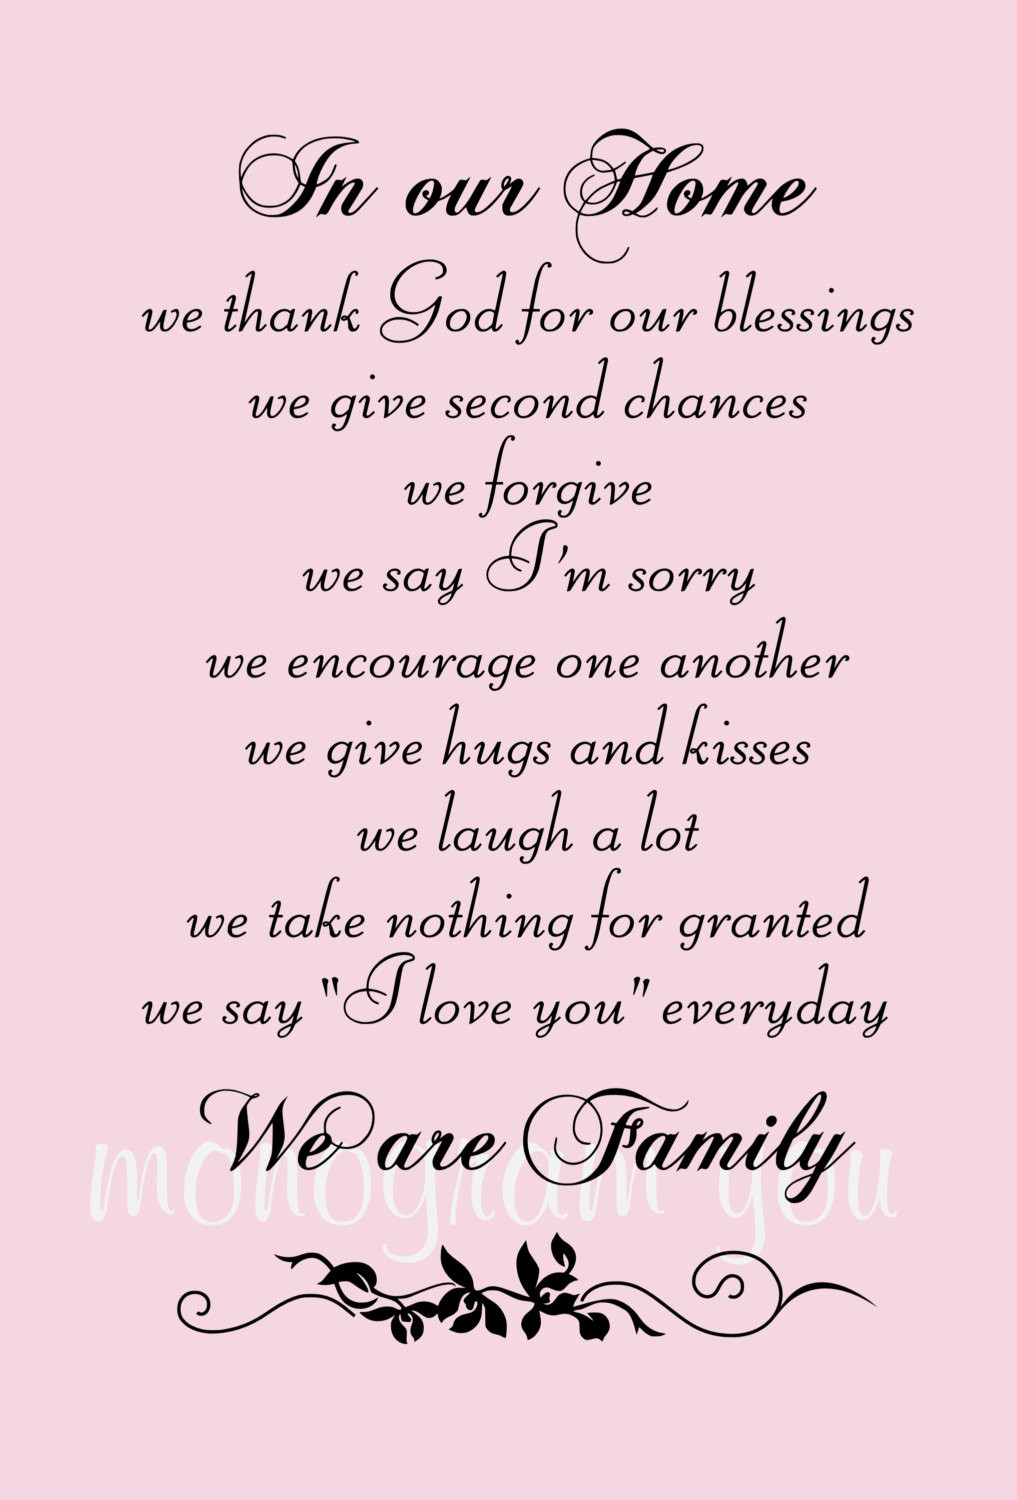 Family Blessings Quotes
 Family Wall Decal Quote In Our Home we thank God for our